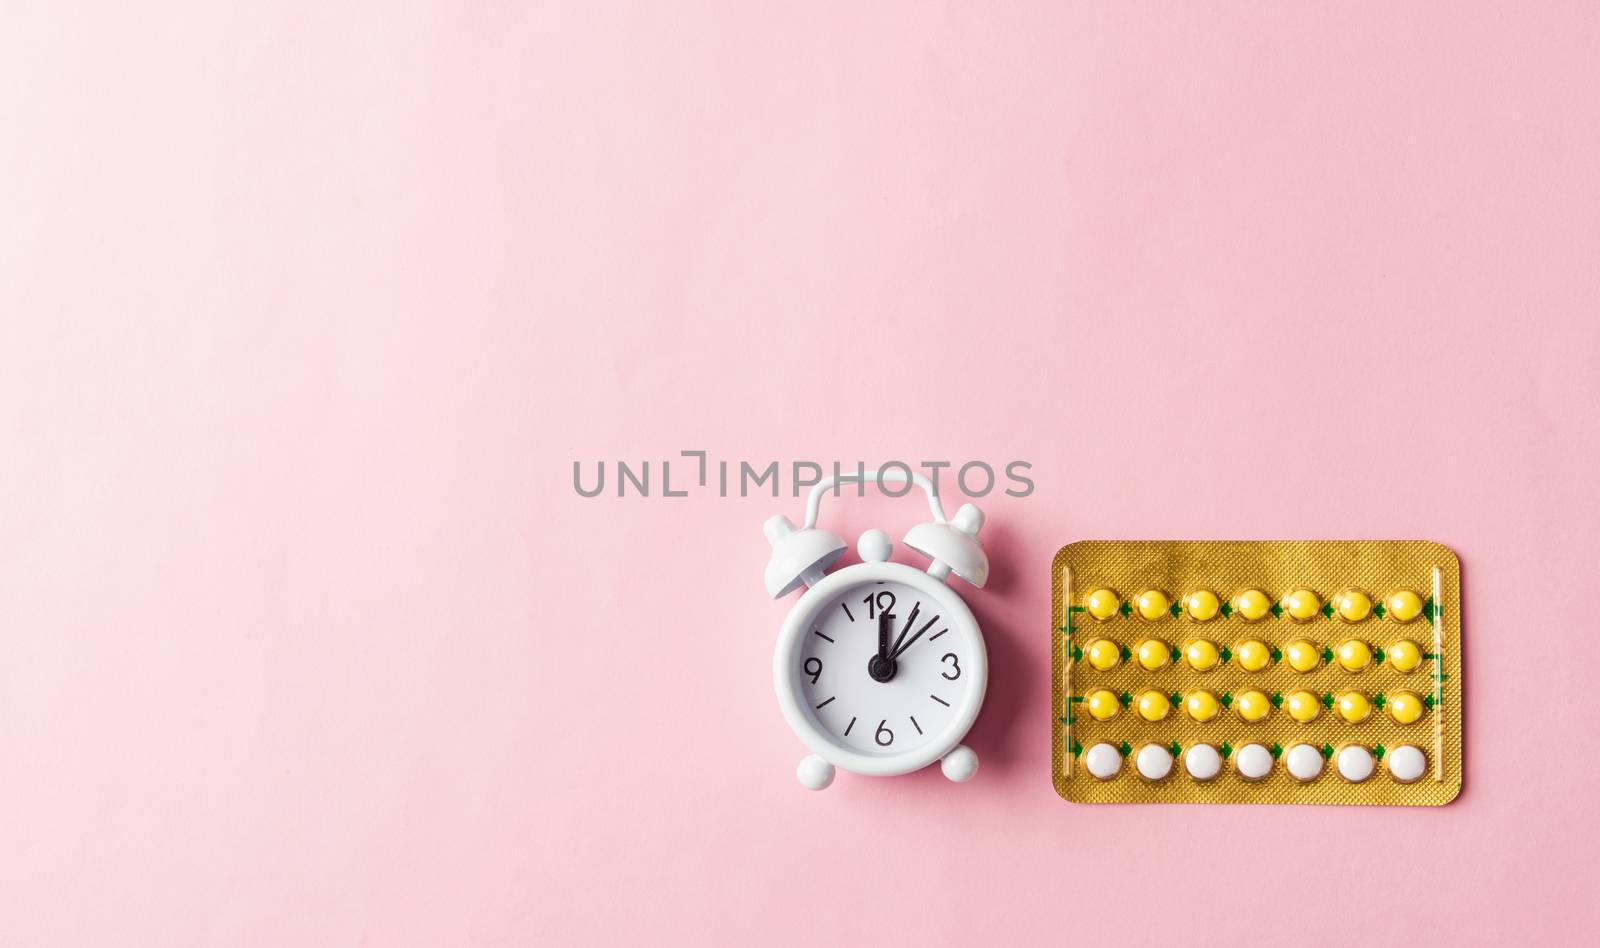 World sexual health or Aids day, Top view flat lay medicine birth control, alarm clock and contraceptive pills, studio shot isolated on a pink background, Safe sex and reproductive health concept